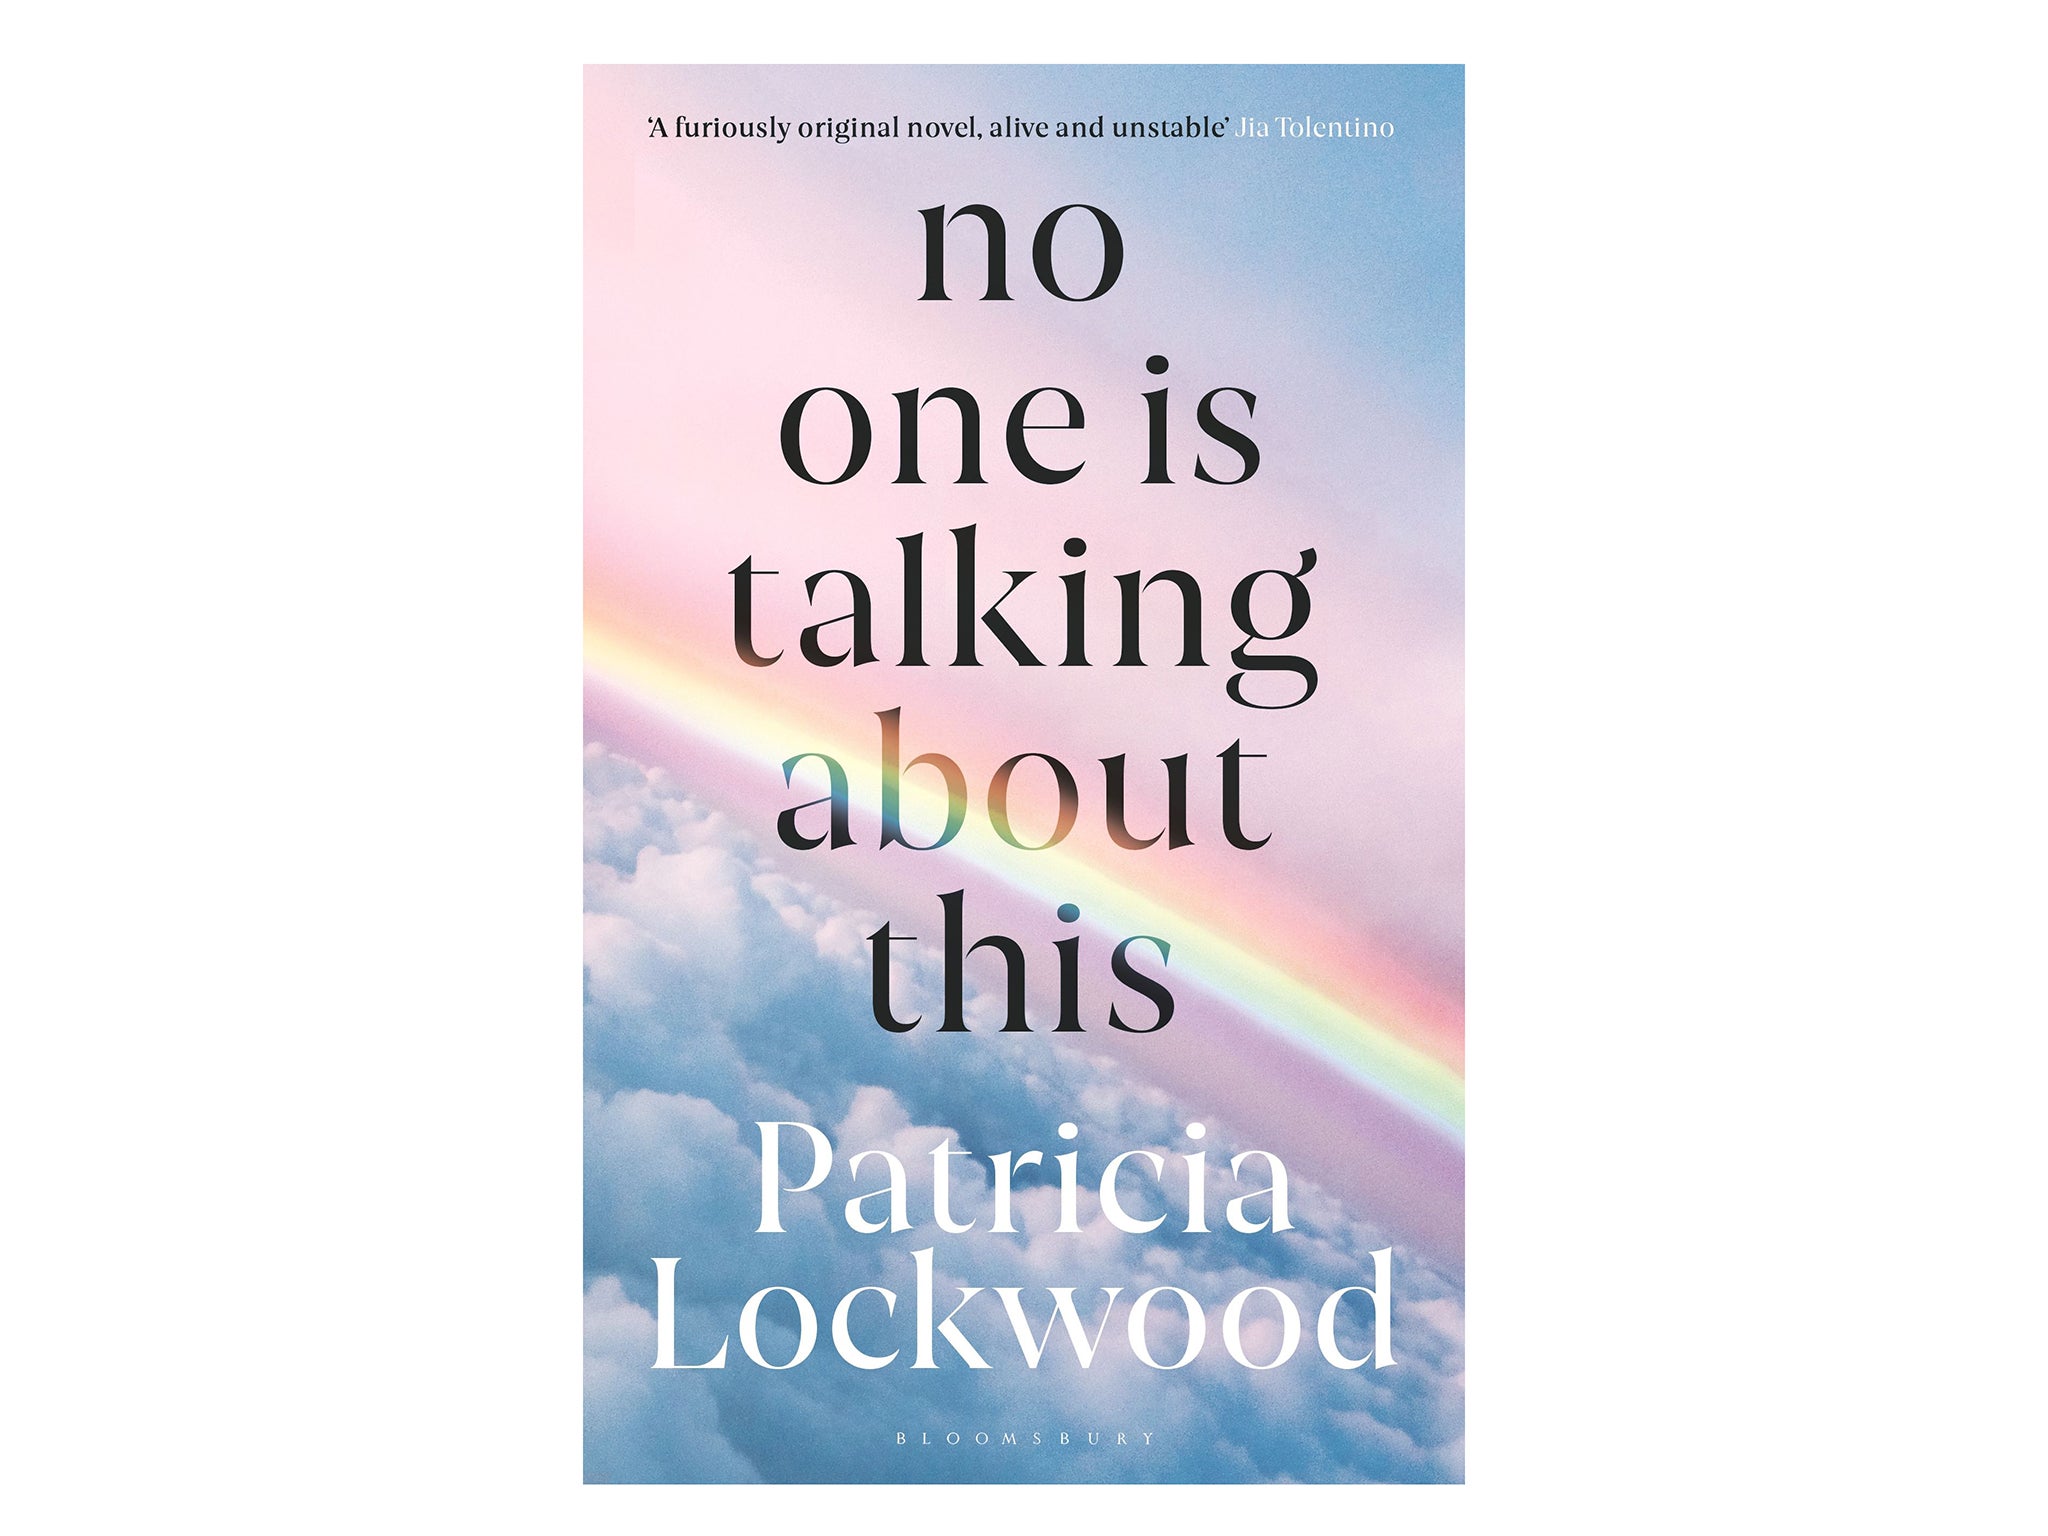 womens-prize-for-fiction-shortlist-indybest- No One is Talking about This, Patricia Lockwood.jpg